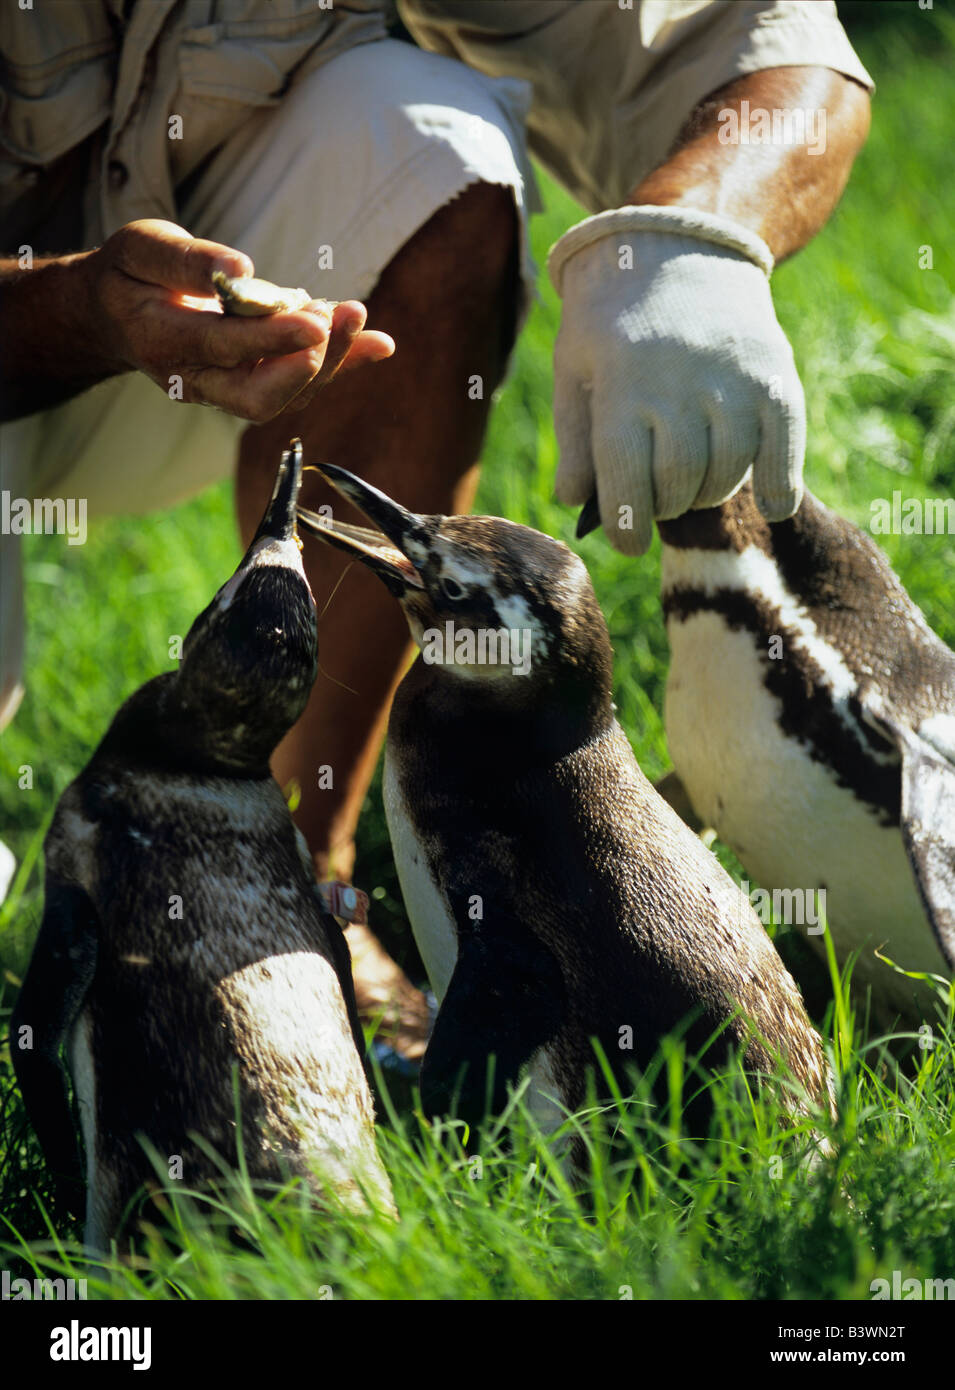 South America, Uruguay; Piriapolis; Banded penguins at the animal rescue facility. Stock Photo